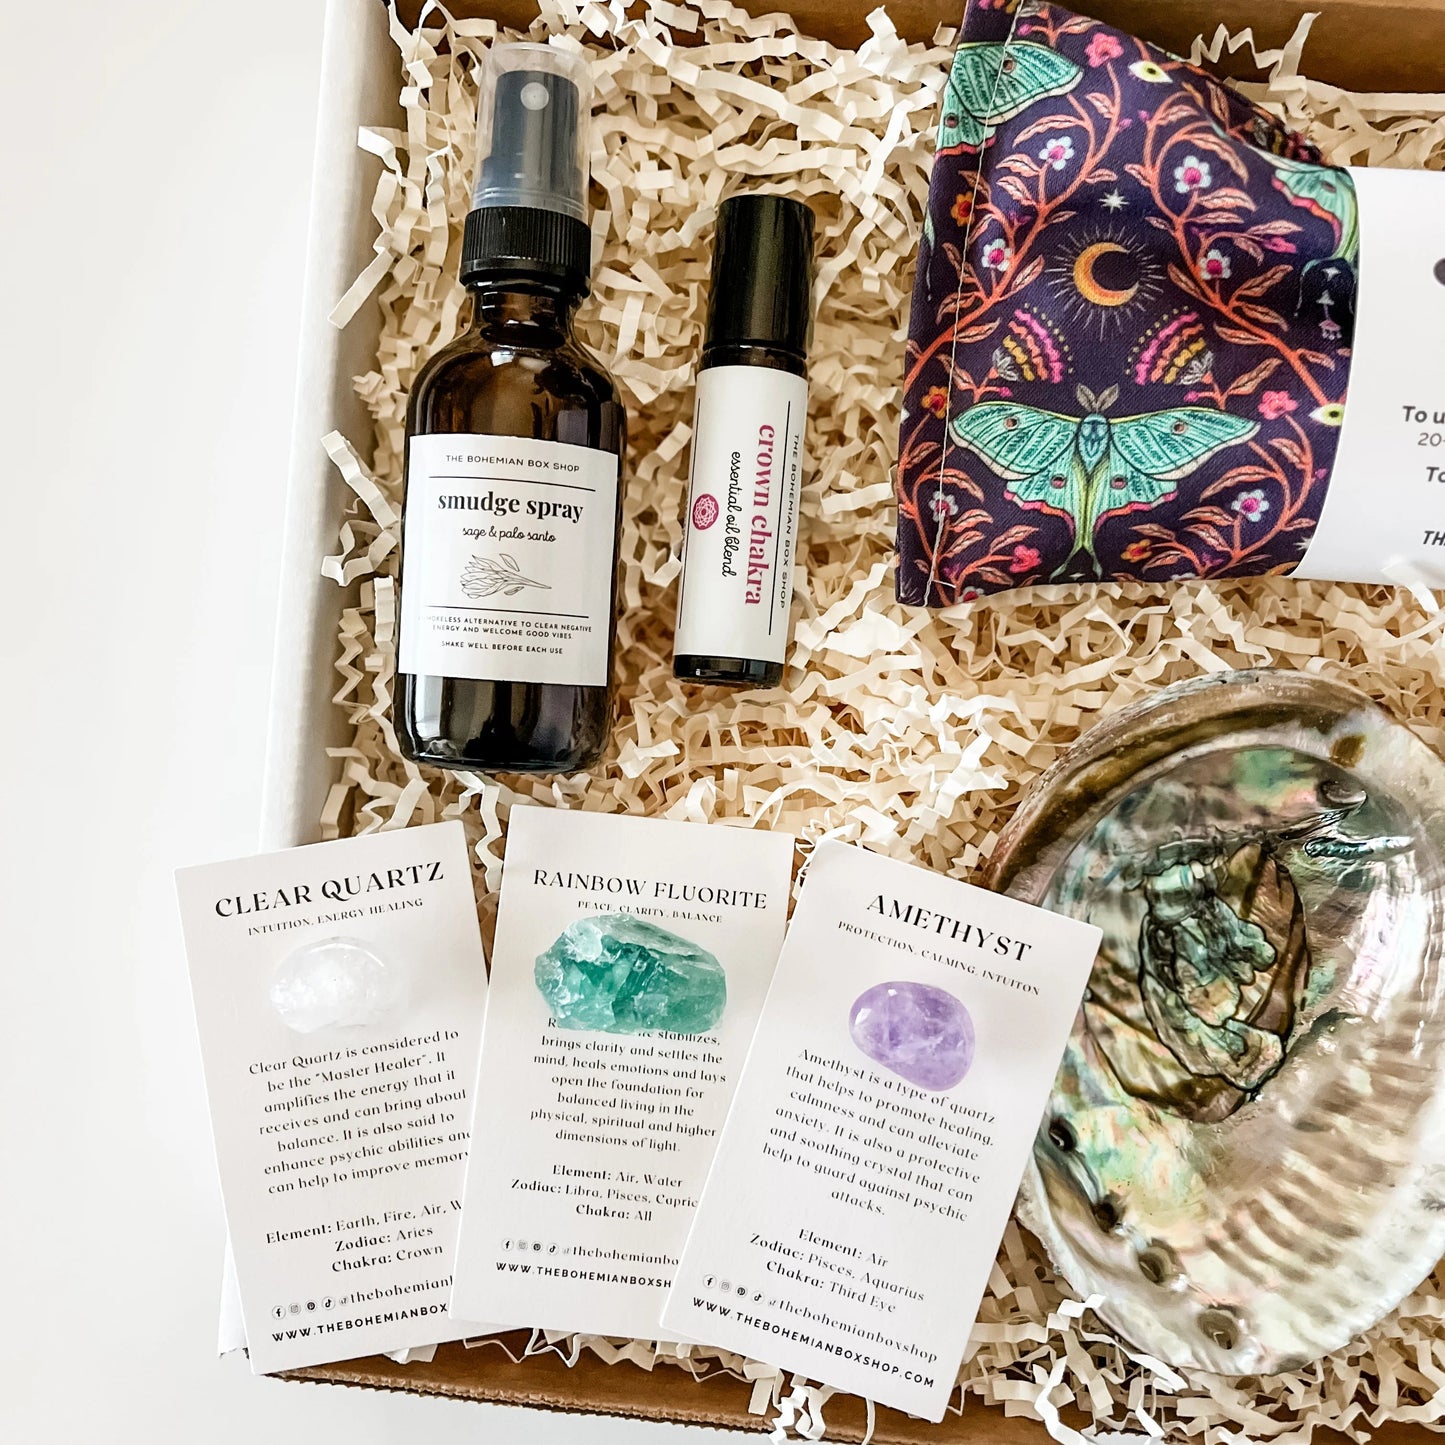 Crown Chakra Healing Gift Set. Includes smudge spray, crystals, crown chakra roller bottle, smudge kit, and Luna moth lavender eye pillow. 